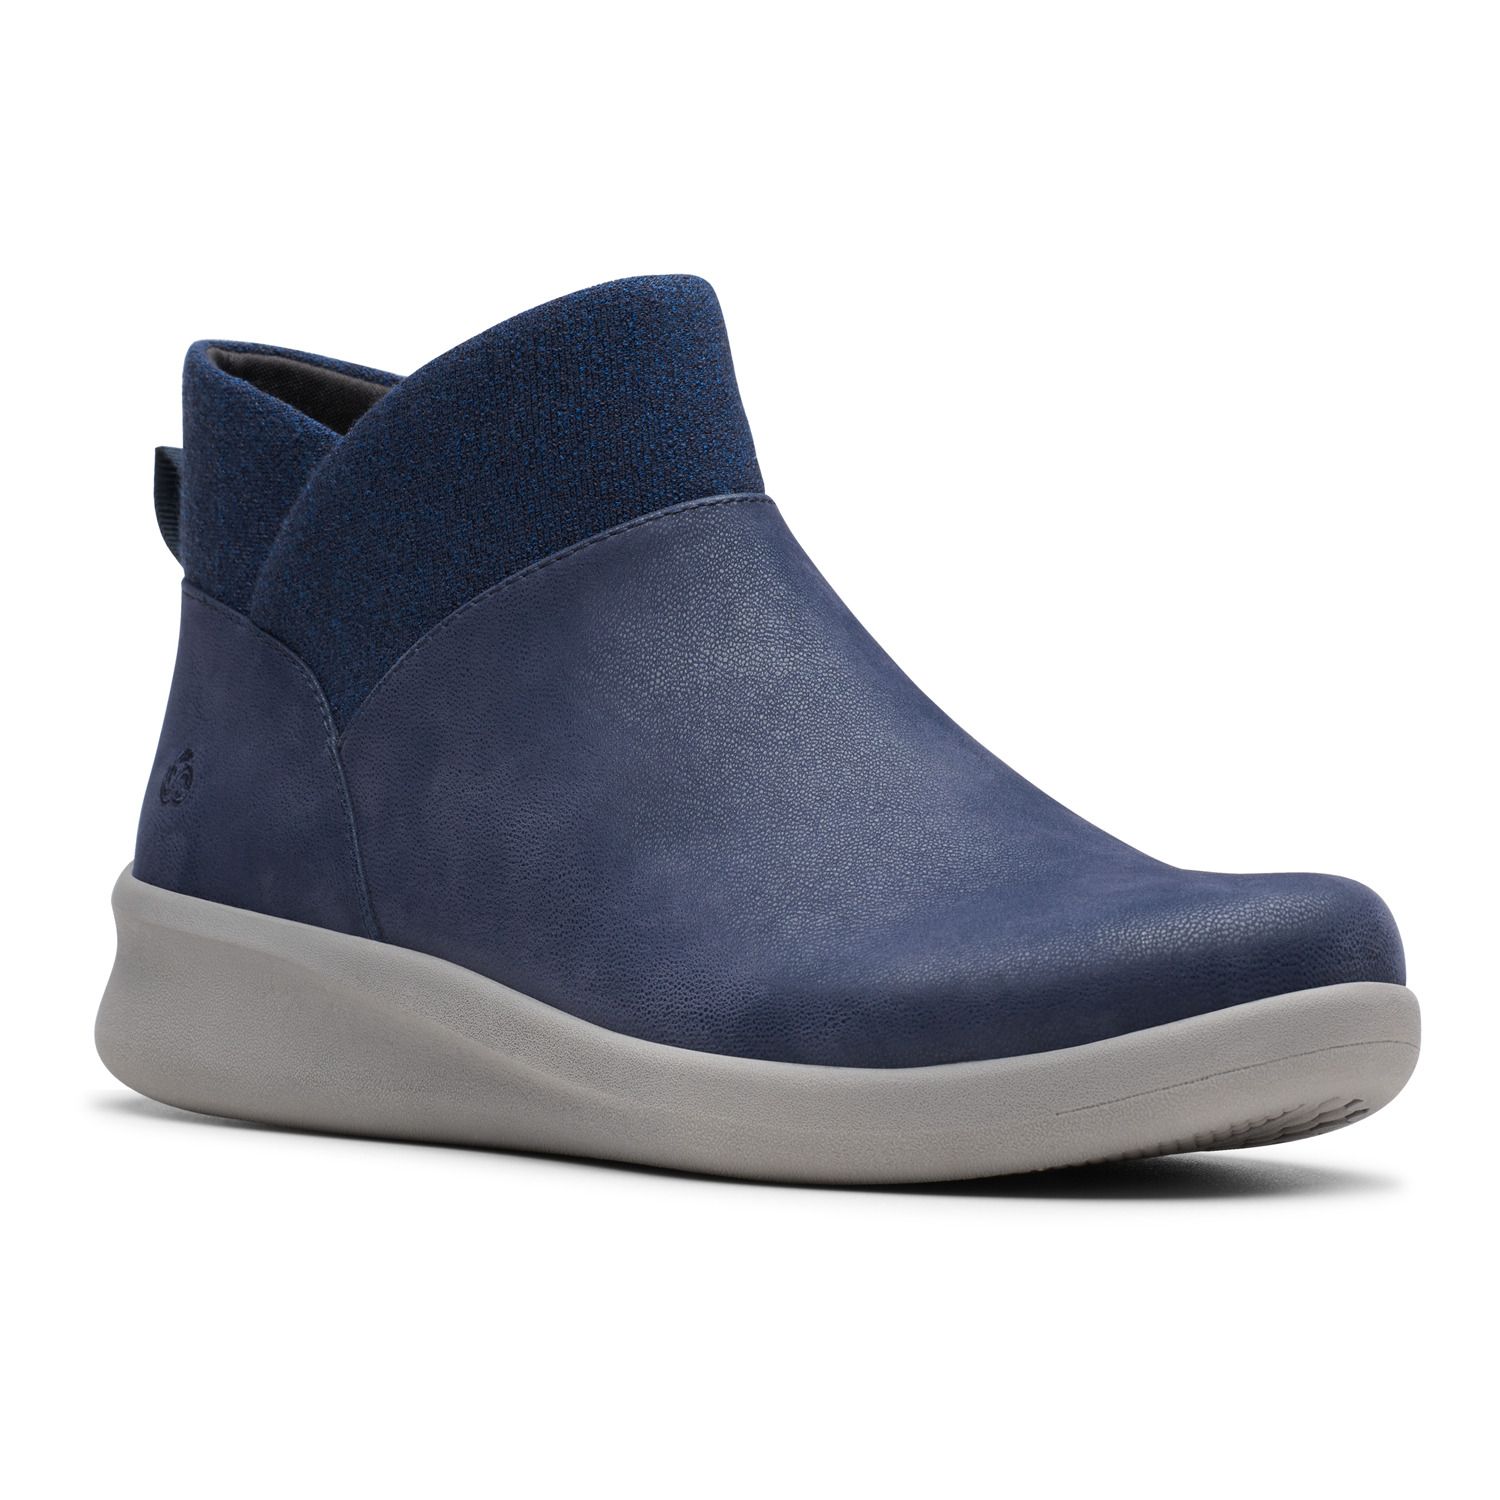 cloudsteppers ankle boots